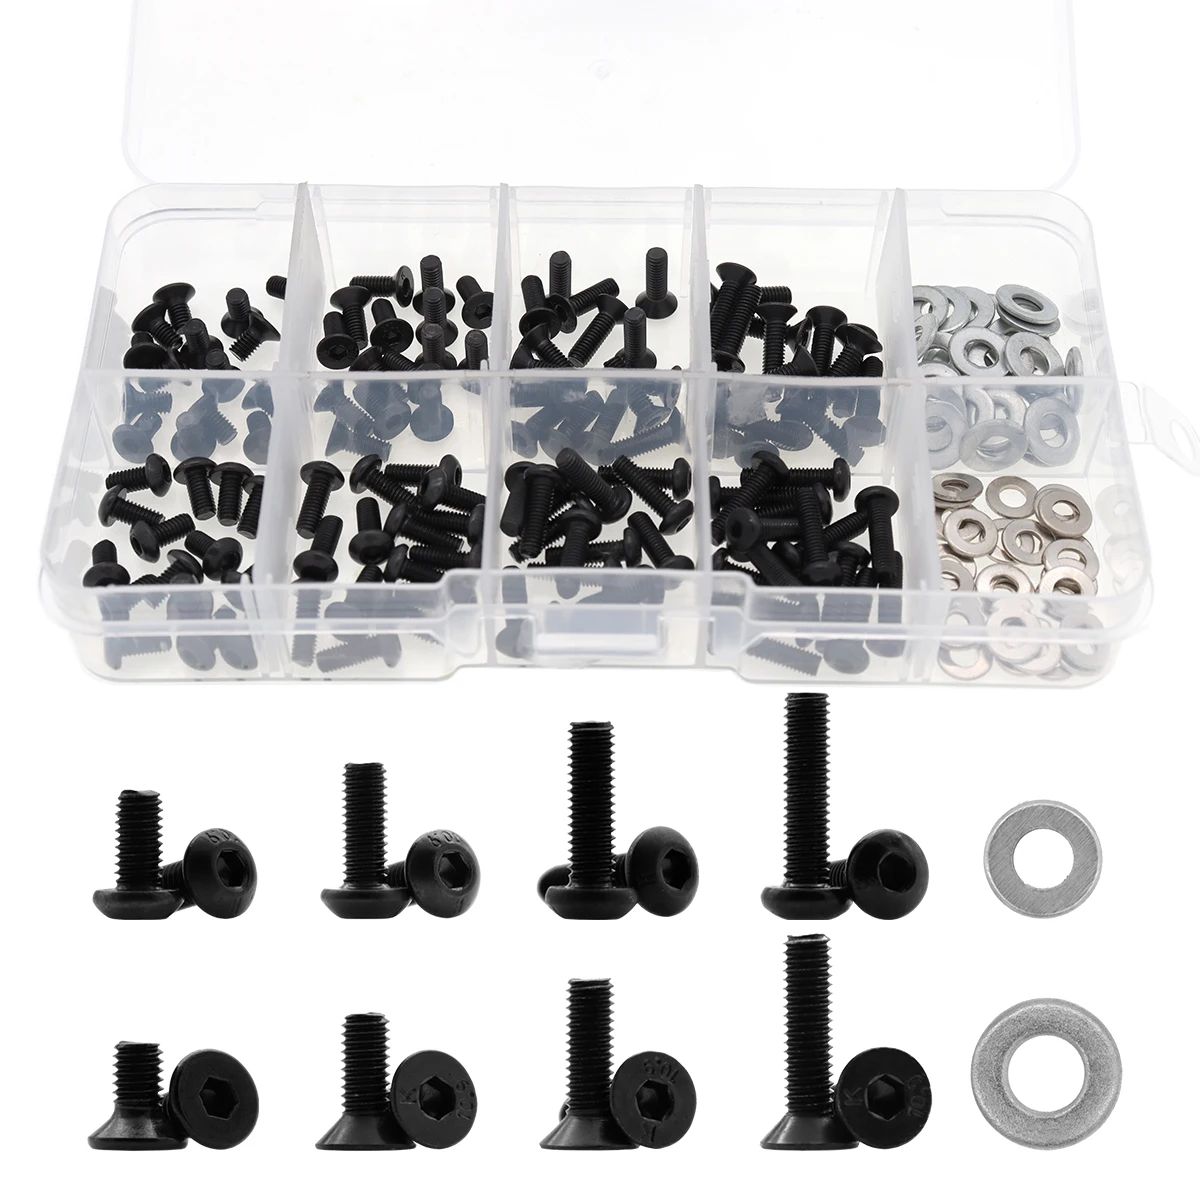 

RC Screw Kit & 340pcs M3 M4 Bolts Washers Hardware Fasteners for Traxxas Axial Redcat HSP HPI Arrma Losi 1/8 1:10 Scale RC Cars